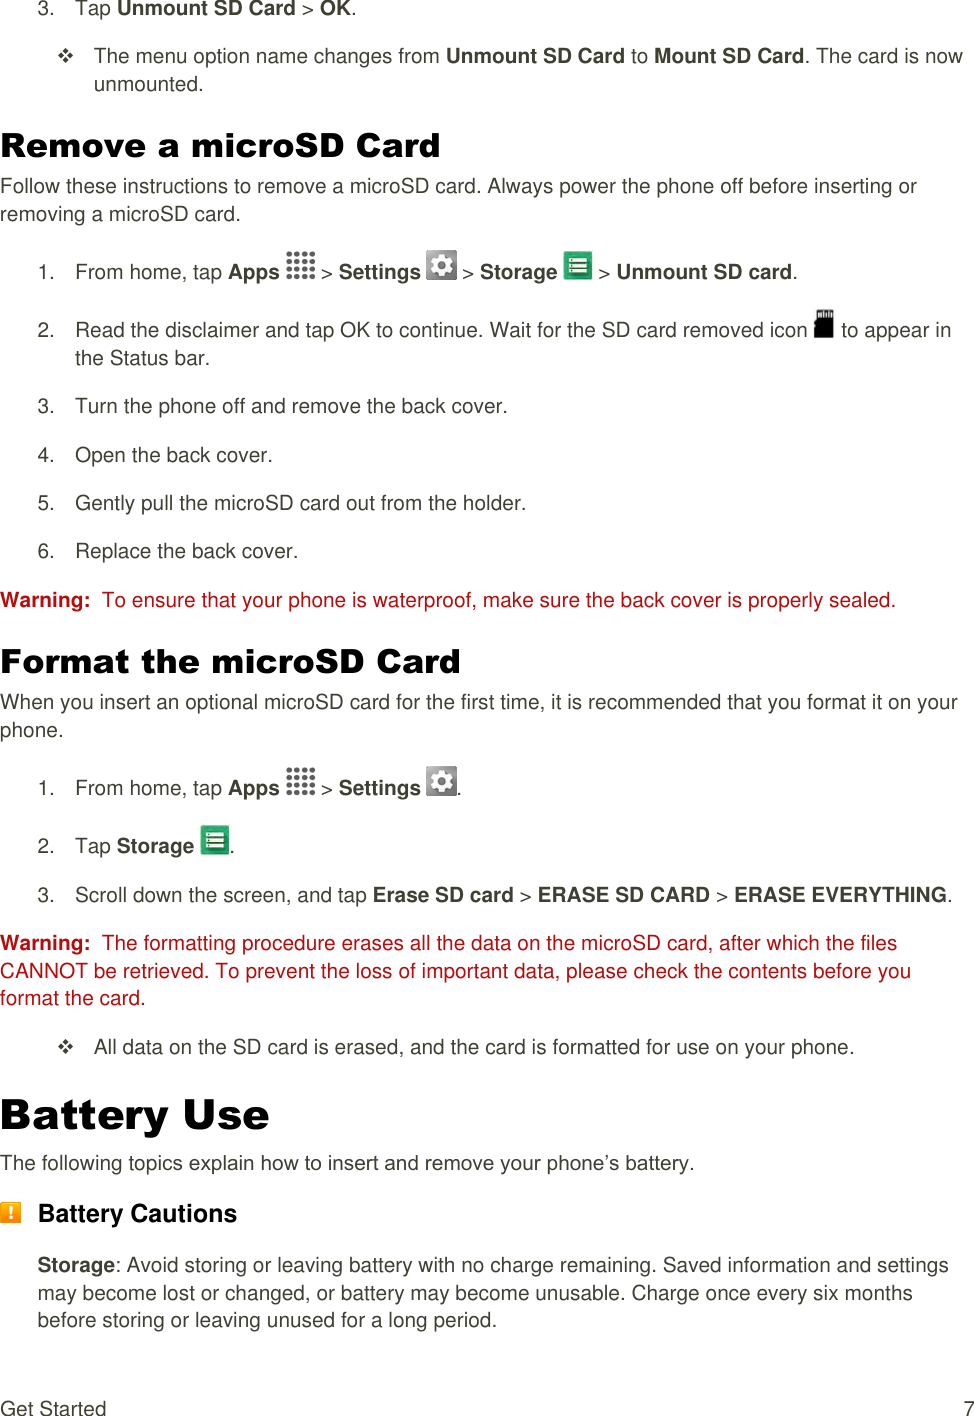 Get Started  7 3.  Tap Unmount SD Card &gt; OK.    The menu option name changes from Unmount SD Card to Mount SD Card. The card is now unmounted. Remove a microSD Card Follow these instructions to remove a microSD card. Always power the phone off before inserting or removing a microSD card. 1.  From home, tap Apps   &gt; Settings   &gt; Storage   &gt; Unmount SD card. 2.  Read the disclaimer and tap OK to continue. Wait for the SD card removed icon   to appear in the Status bar. 3.  Turn the phone off and remove the back cover. 4.  Open the back cover. 5.  Gently pull the microSD card out from the holder. 6.  Replace the back cover. Warning:  To ensure that your phone is waterproof, make sure the back cover is properly sealed. Format the microSD Card When you insert an optional microSD card for the first time, it is recommended that you format it on your phone. 1.  From home, tap Apps   &gt; Settings  .  2.  Tap Storage  .  3.  Scroll down the screen, and tap Erase SD card &gt; ERASE SD CARD &gt; ERASE EVERYTHING.  Warning:  The formatting procedure erases all the data on the microSD card, after which the files CANNOT be retrieved. To prevent the loss of important data, please check the contents before you format the card.   All data on the SD card is erased, and the card is formatted for use on your phone. Battery Use The following topics explain how to insert and remove your phone’s battery.  Battery Cautions Storage: Avoid storing or leaving battery with no charge remaining. Saved information and settings may become lost or changed, or battery may become unusable. Charge once every six months before storing or leaving unused for a long period. 